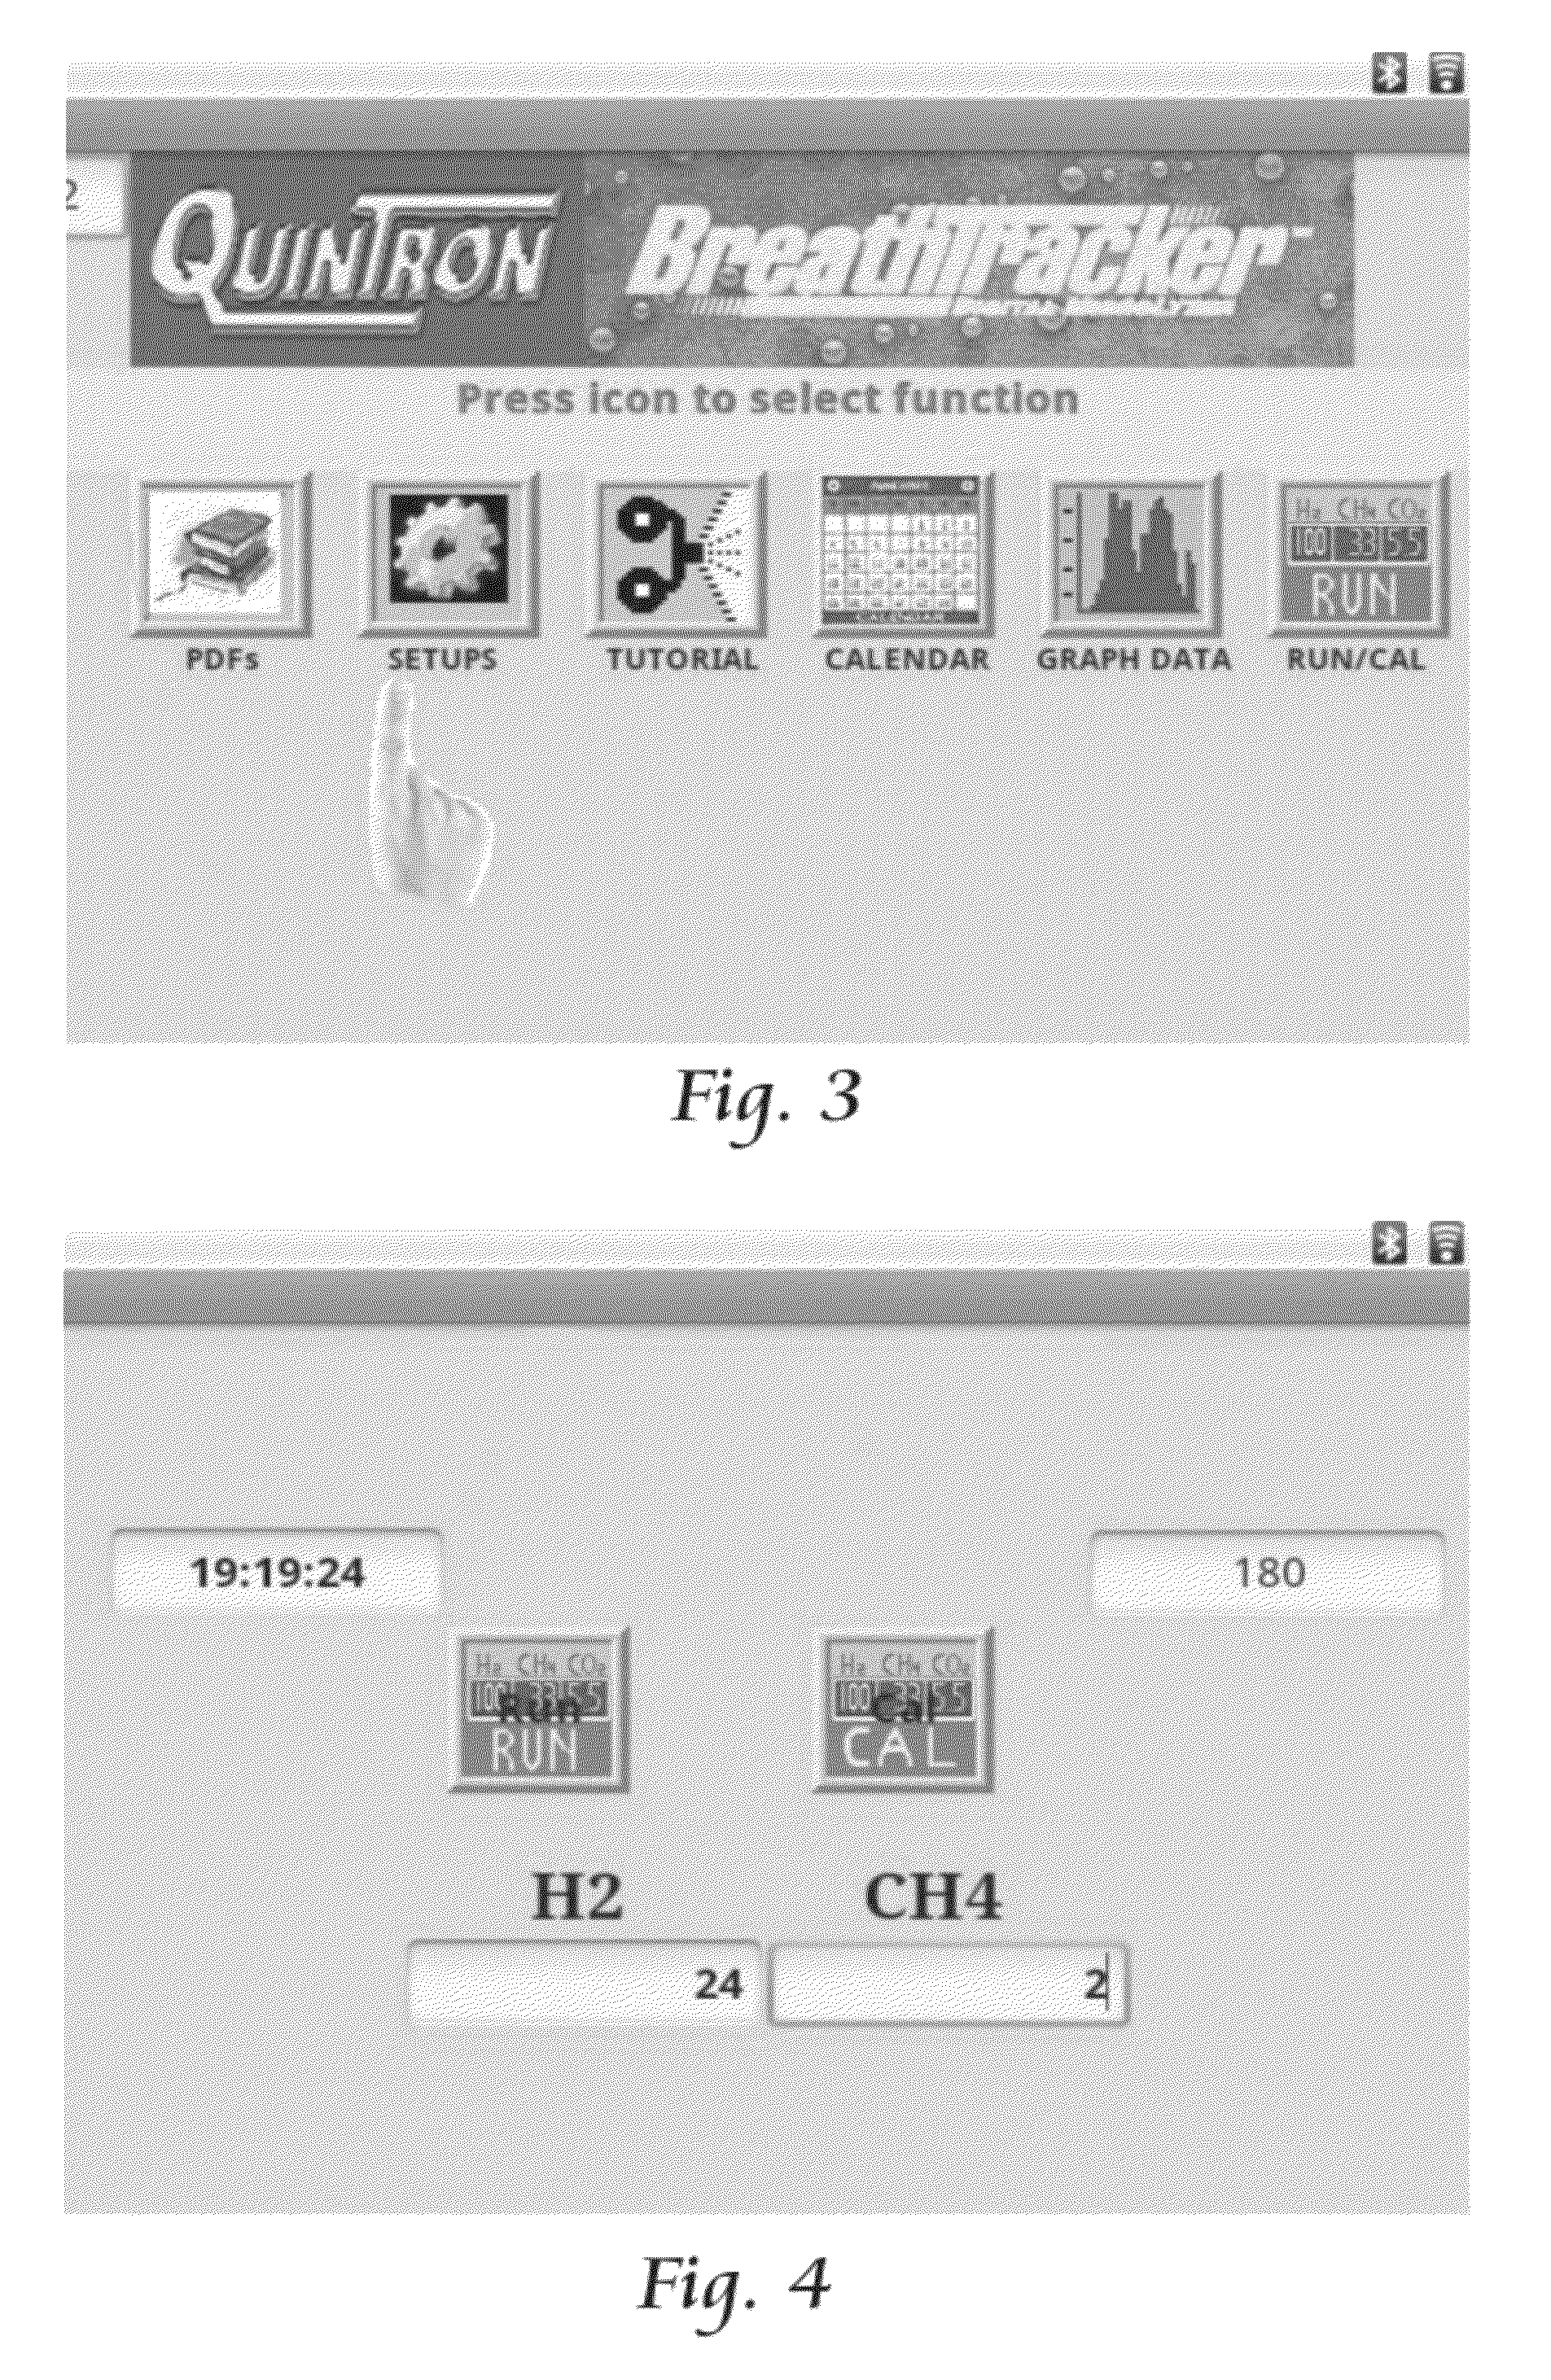 Apparatus and methods for testing apparatus including on-board instructional videos and upload/download data capabilities